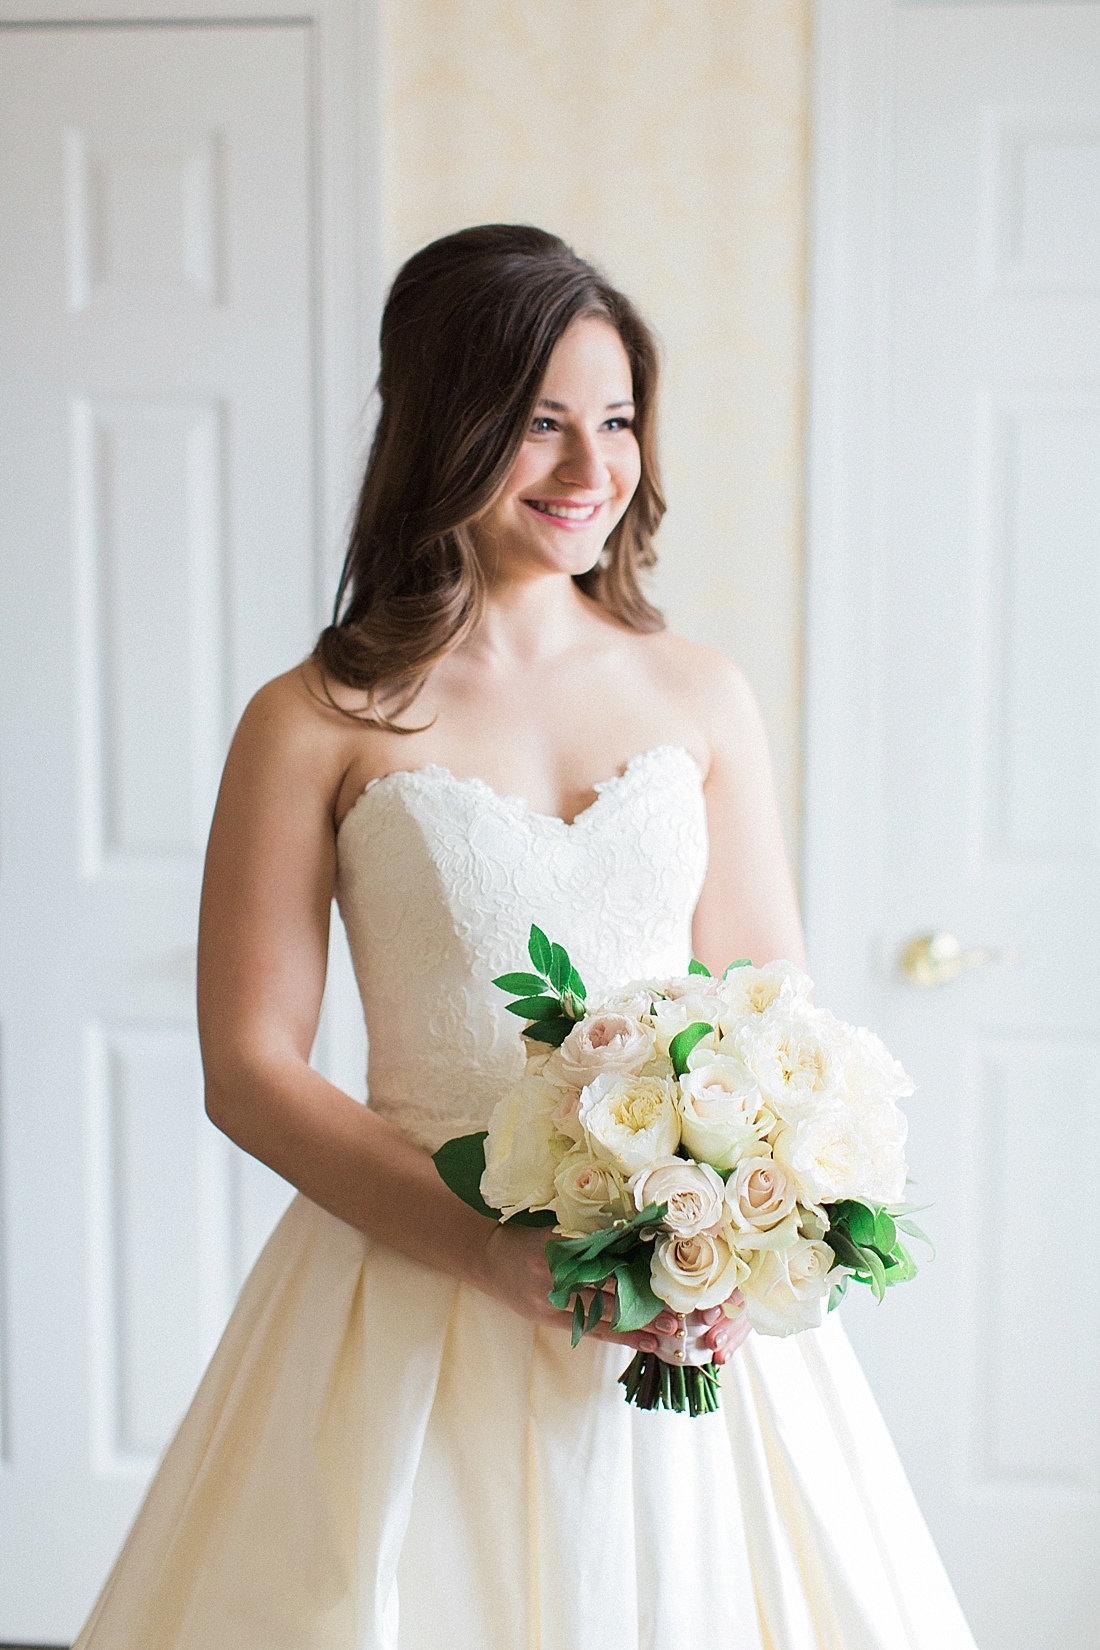 A-line wedding ball gown with lace detail | Abby Grace Photography